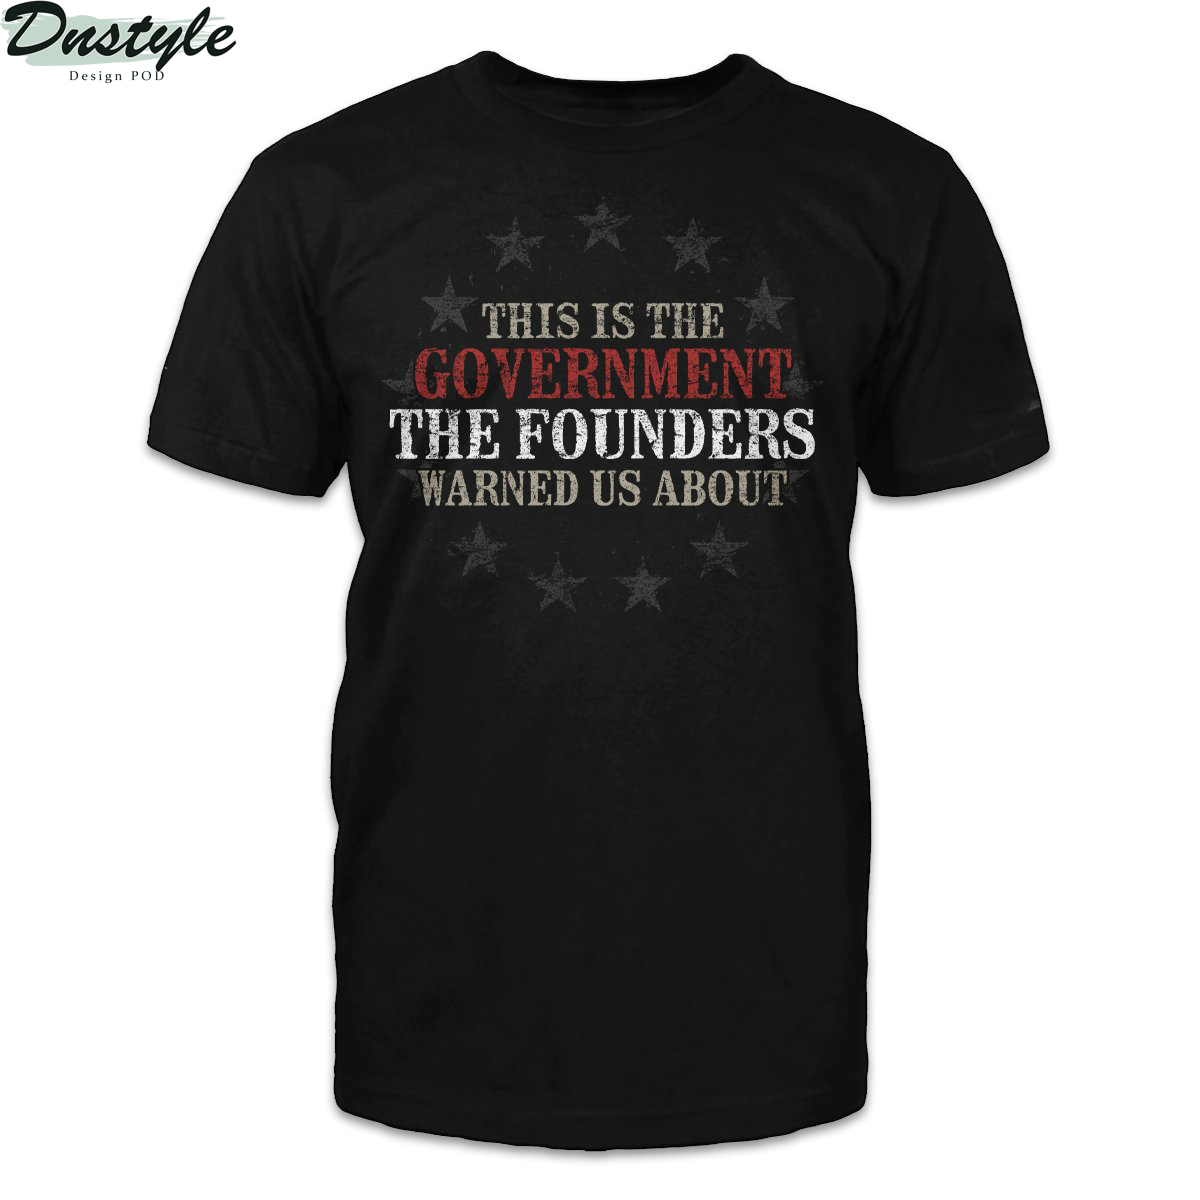 This is the government the founders warned us about shirt